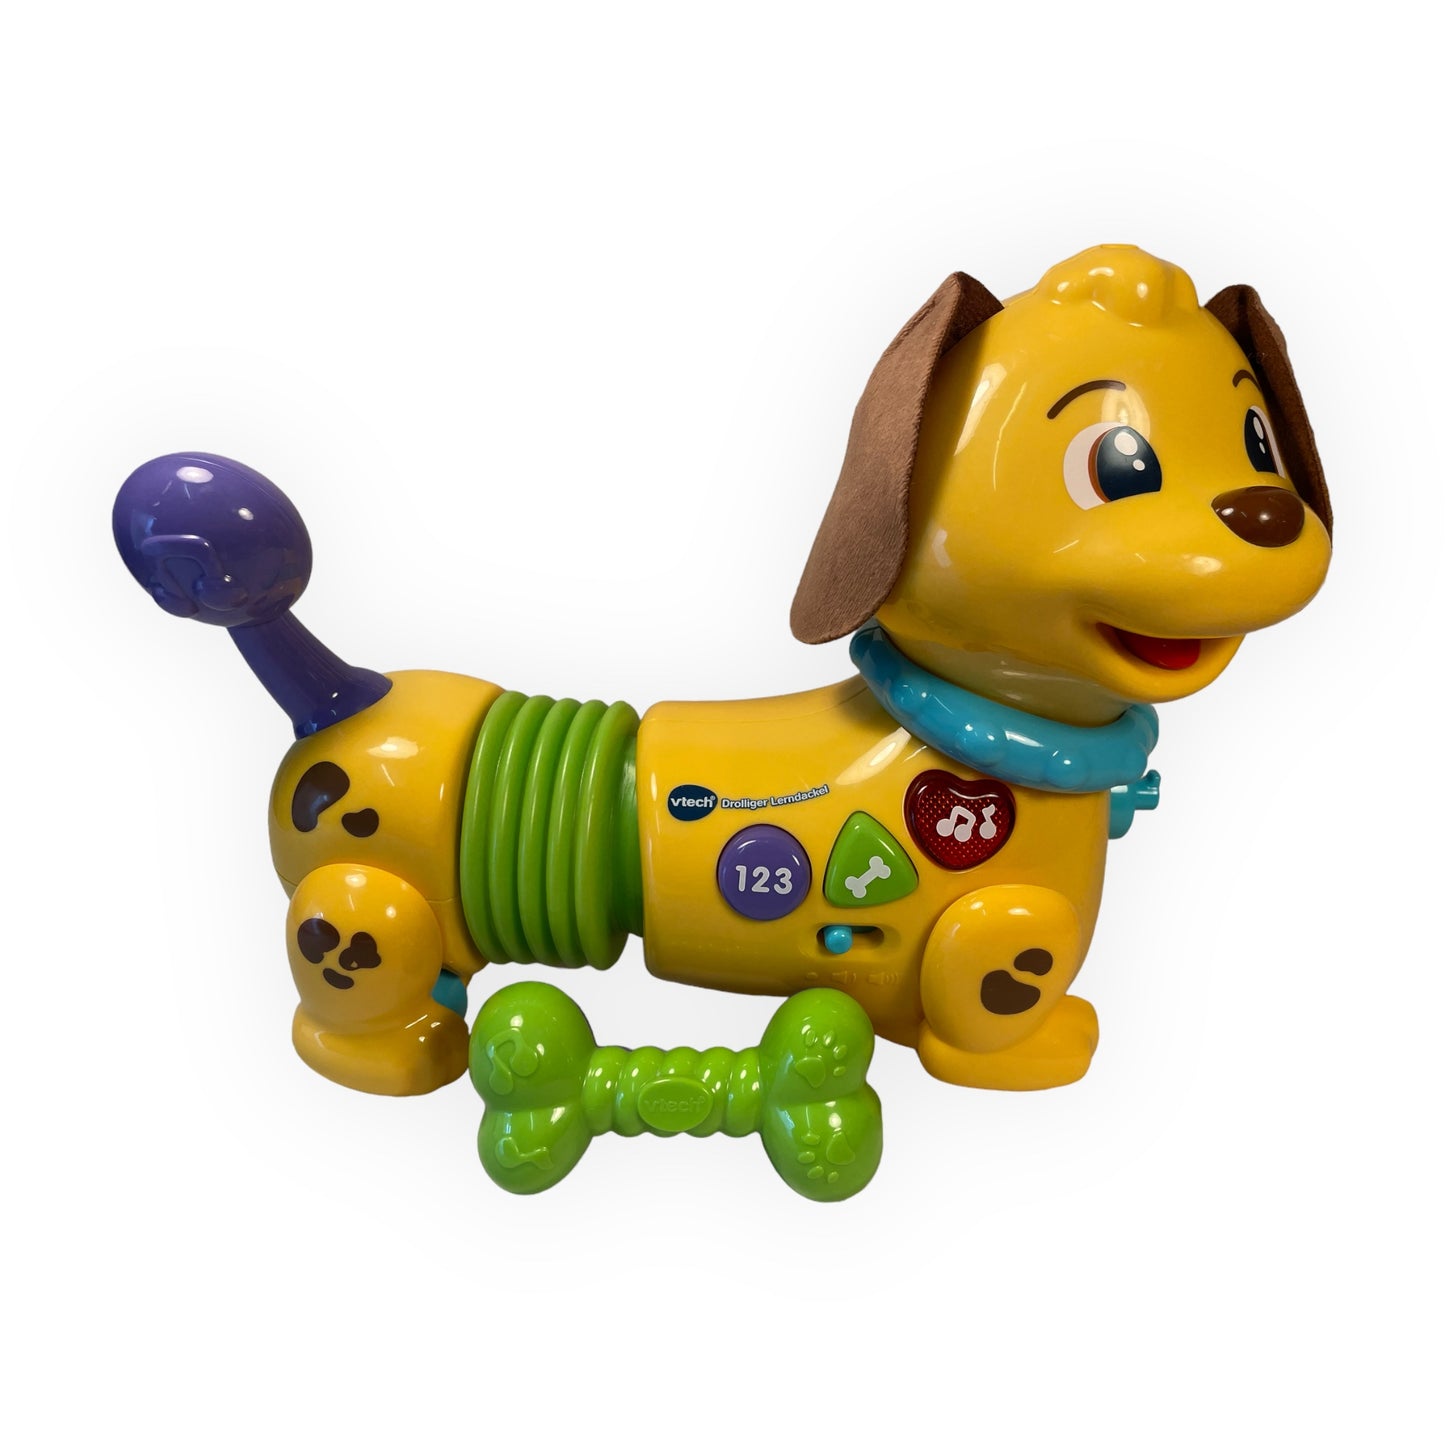 Vtech 80-522704 Comical learning dachshund, Baby Toy, Multi-coloured